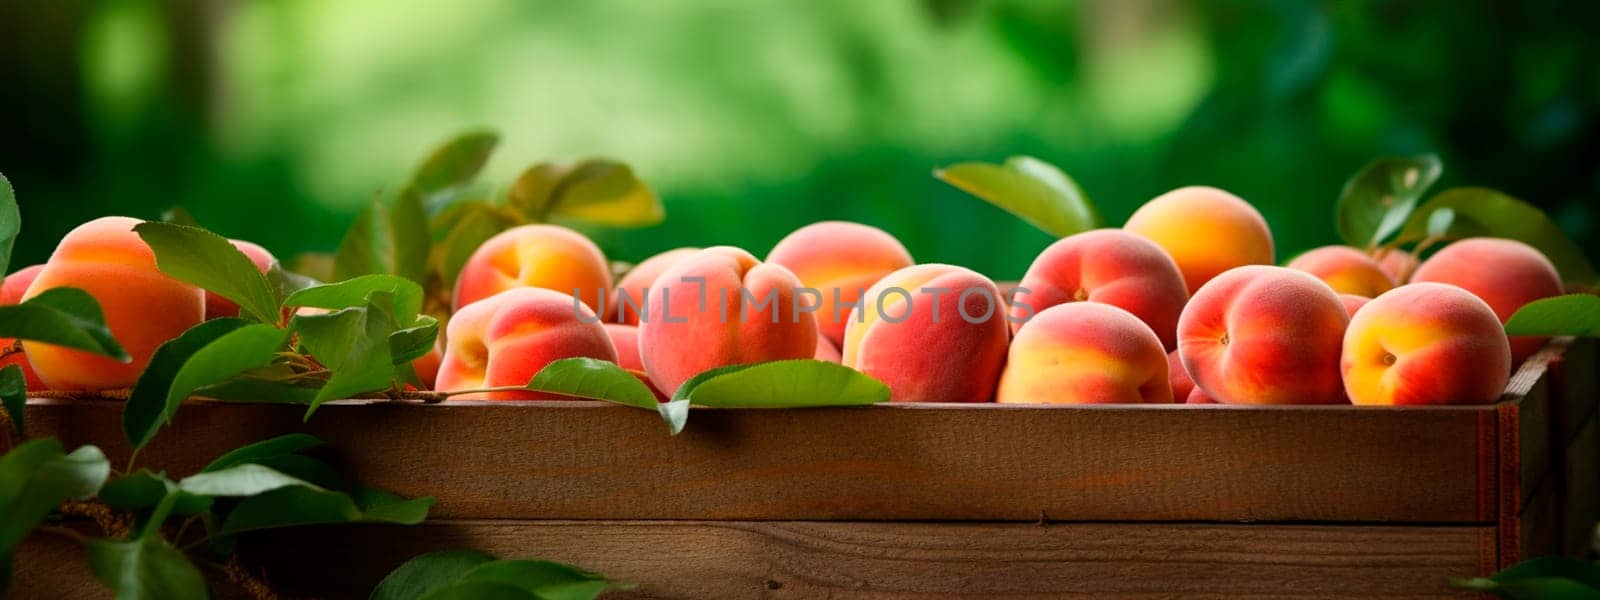 Peaches harvest in a box in the garden. Selective focus. Food.